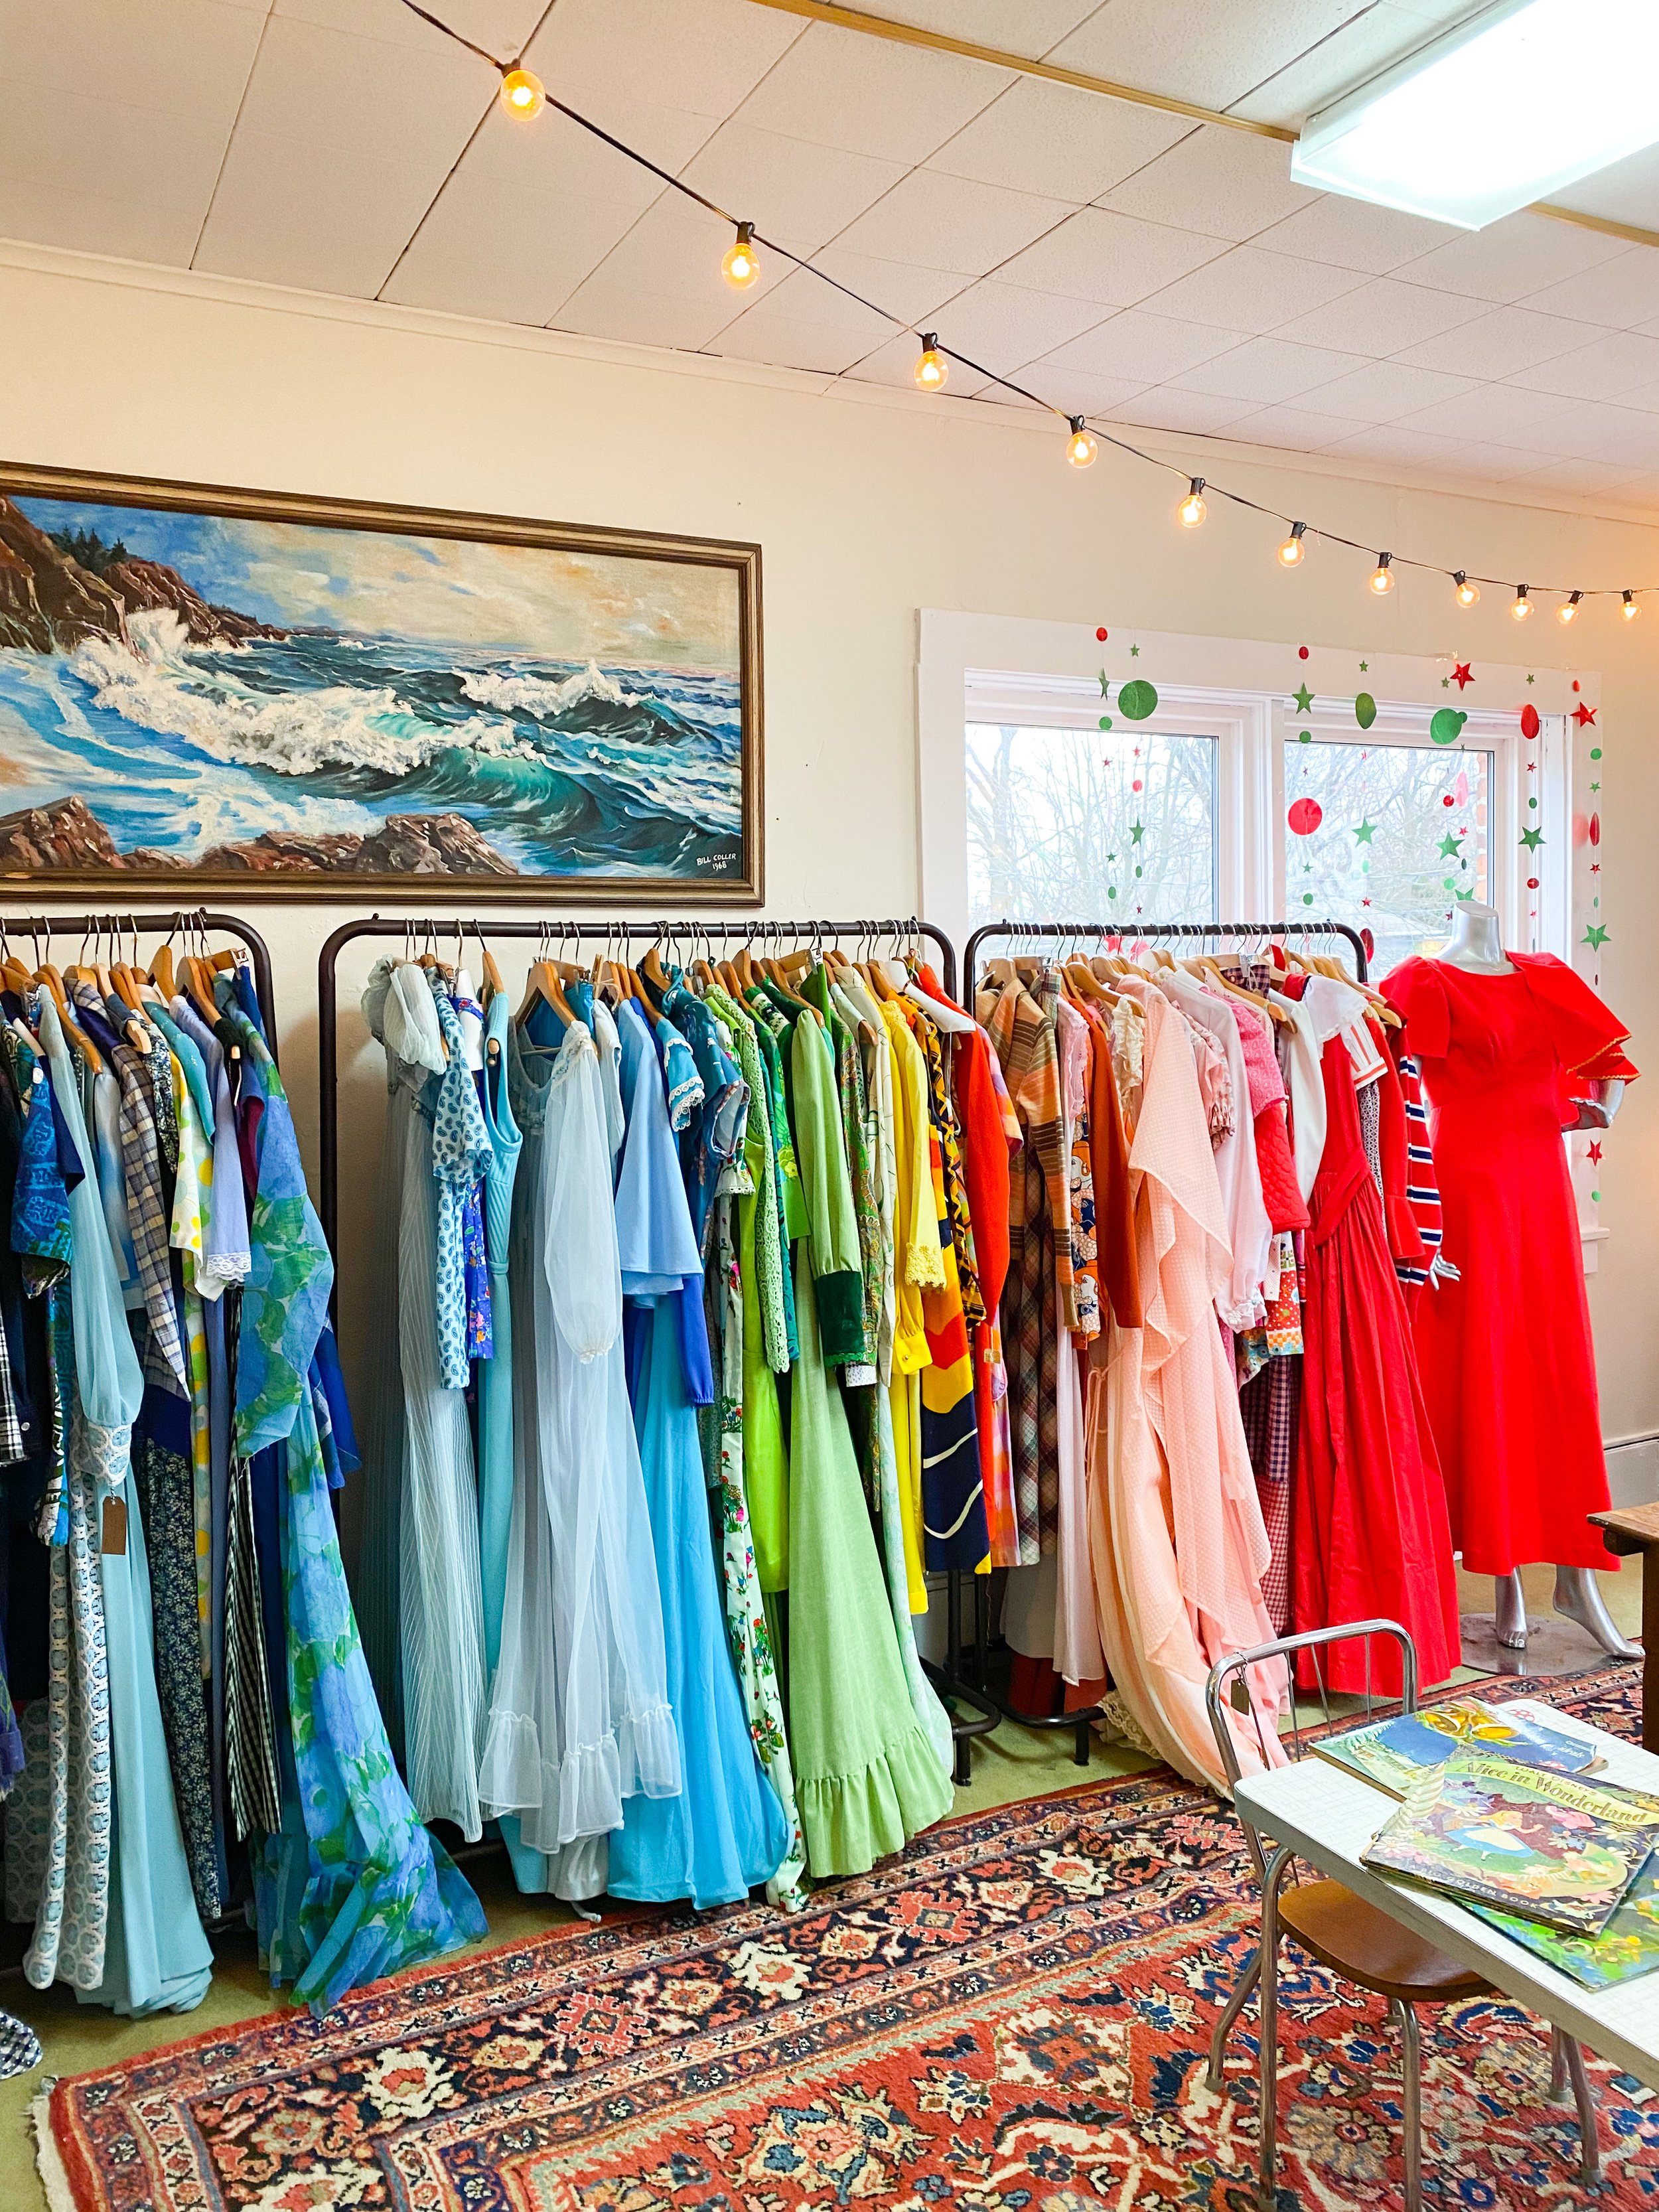 How to find shops for vintage clothing